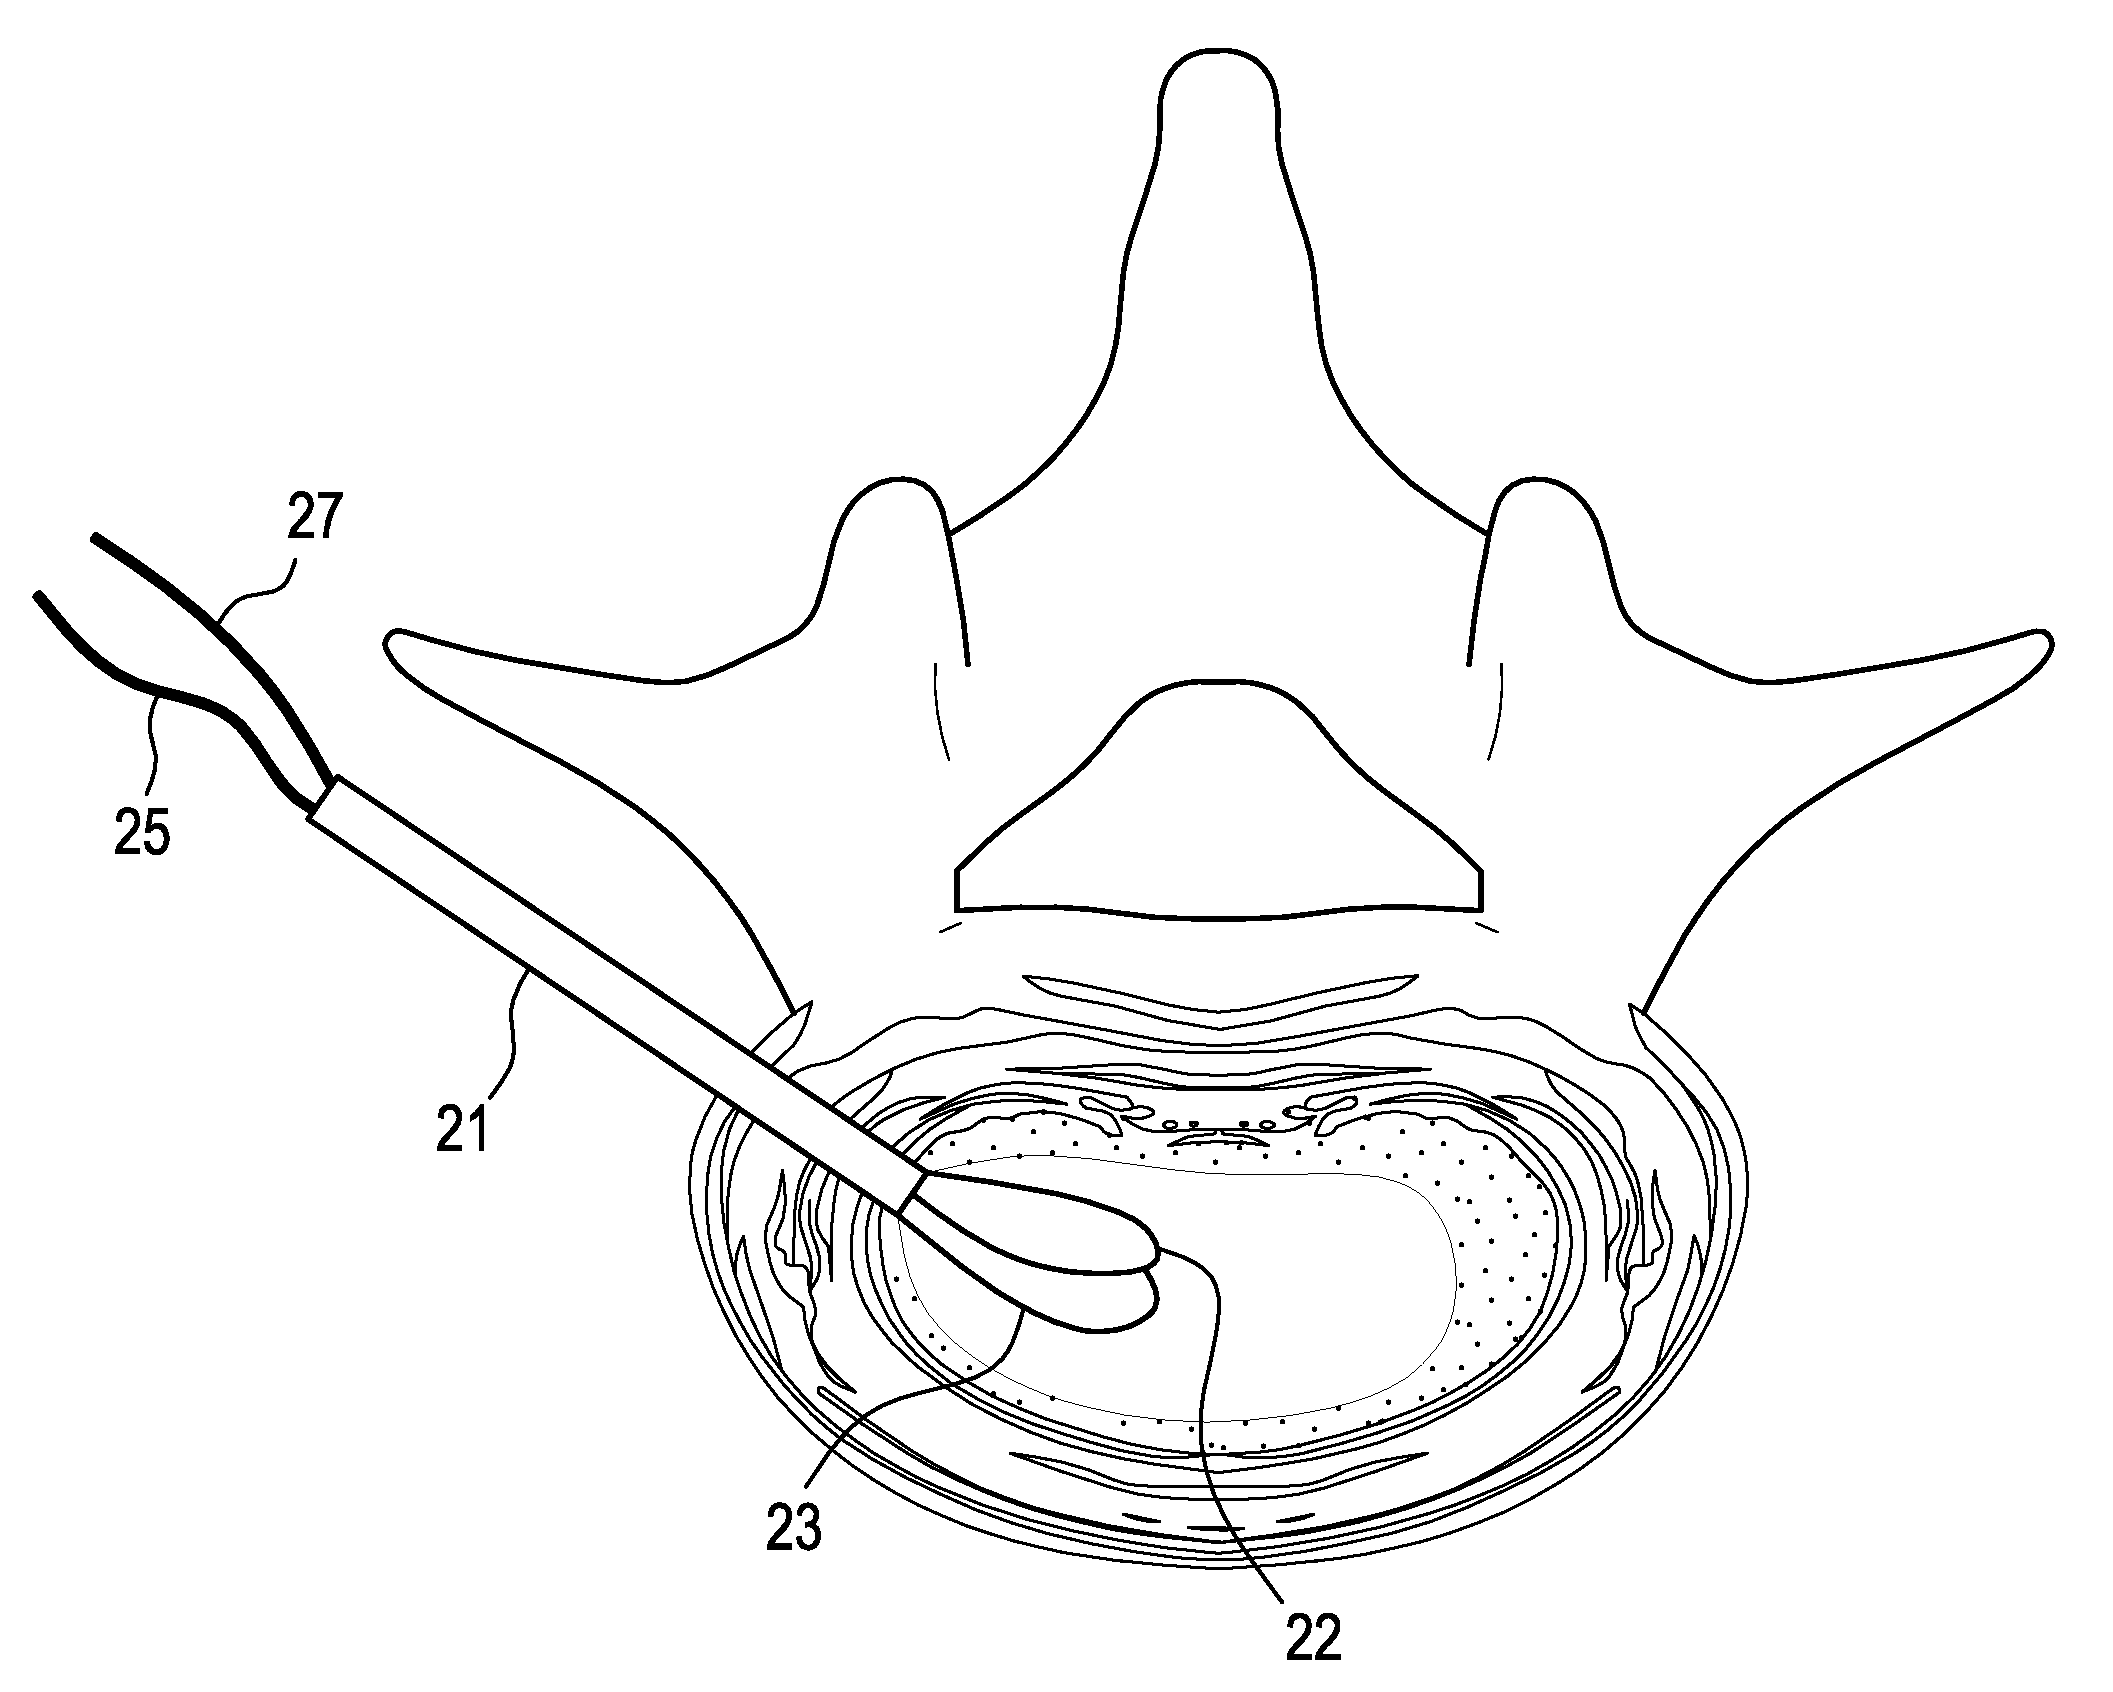 Nucleus replacement device and method